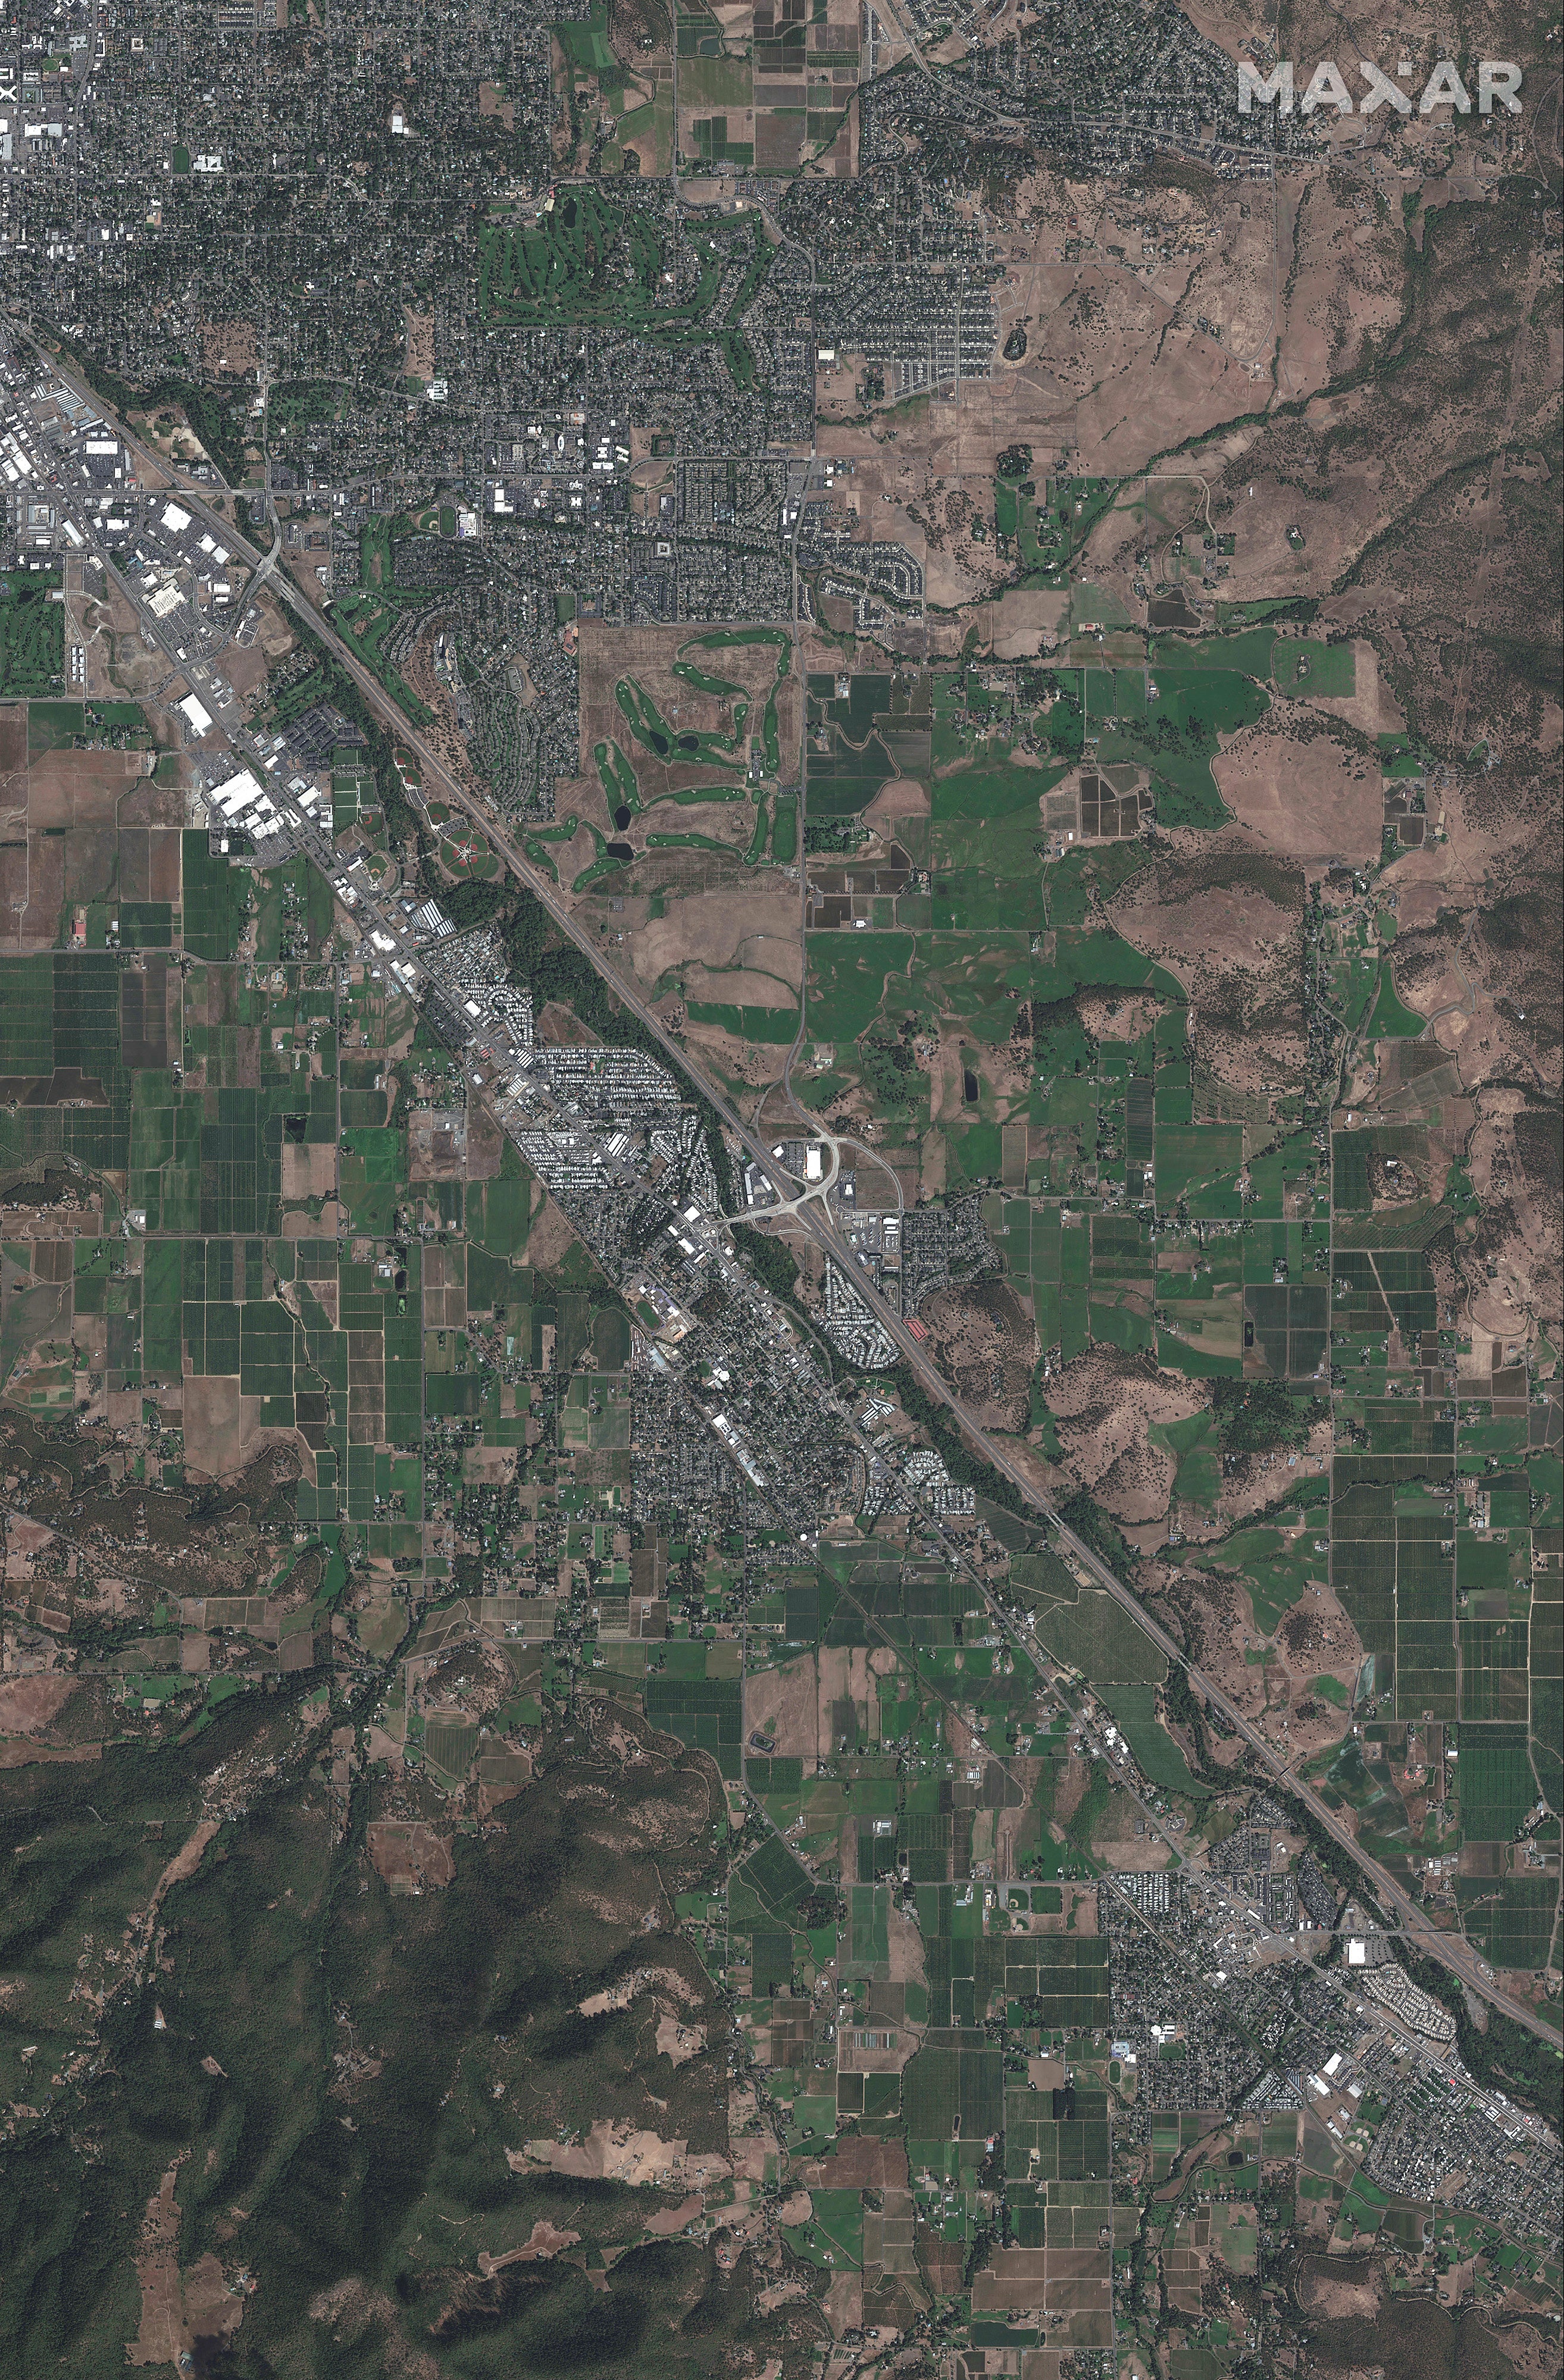 A satellite image shows an overview of Talent, Oregon after the wildfires